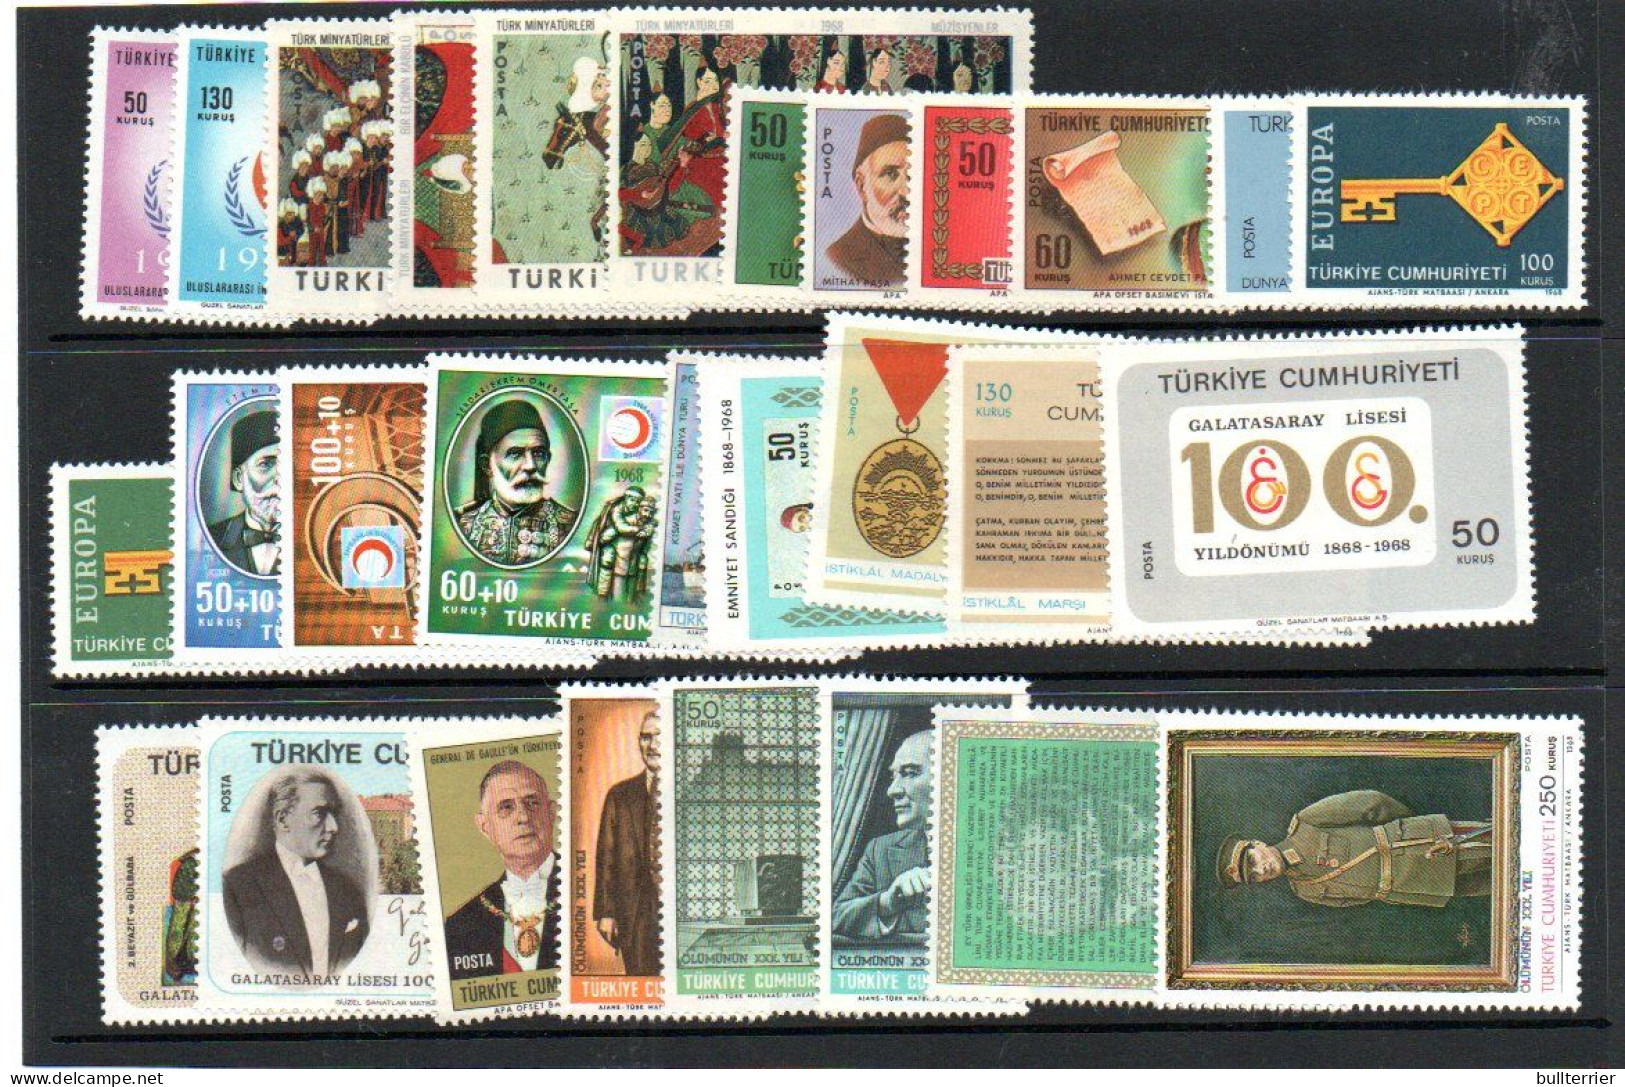 TURKEY -1968 - VARIOUS COMMEMORATIVES  MINT NEVER HINGED  SG CAT £39+ - Unused Stamps